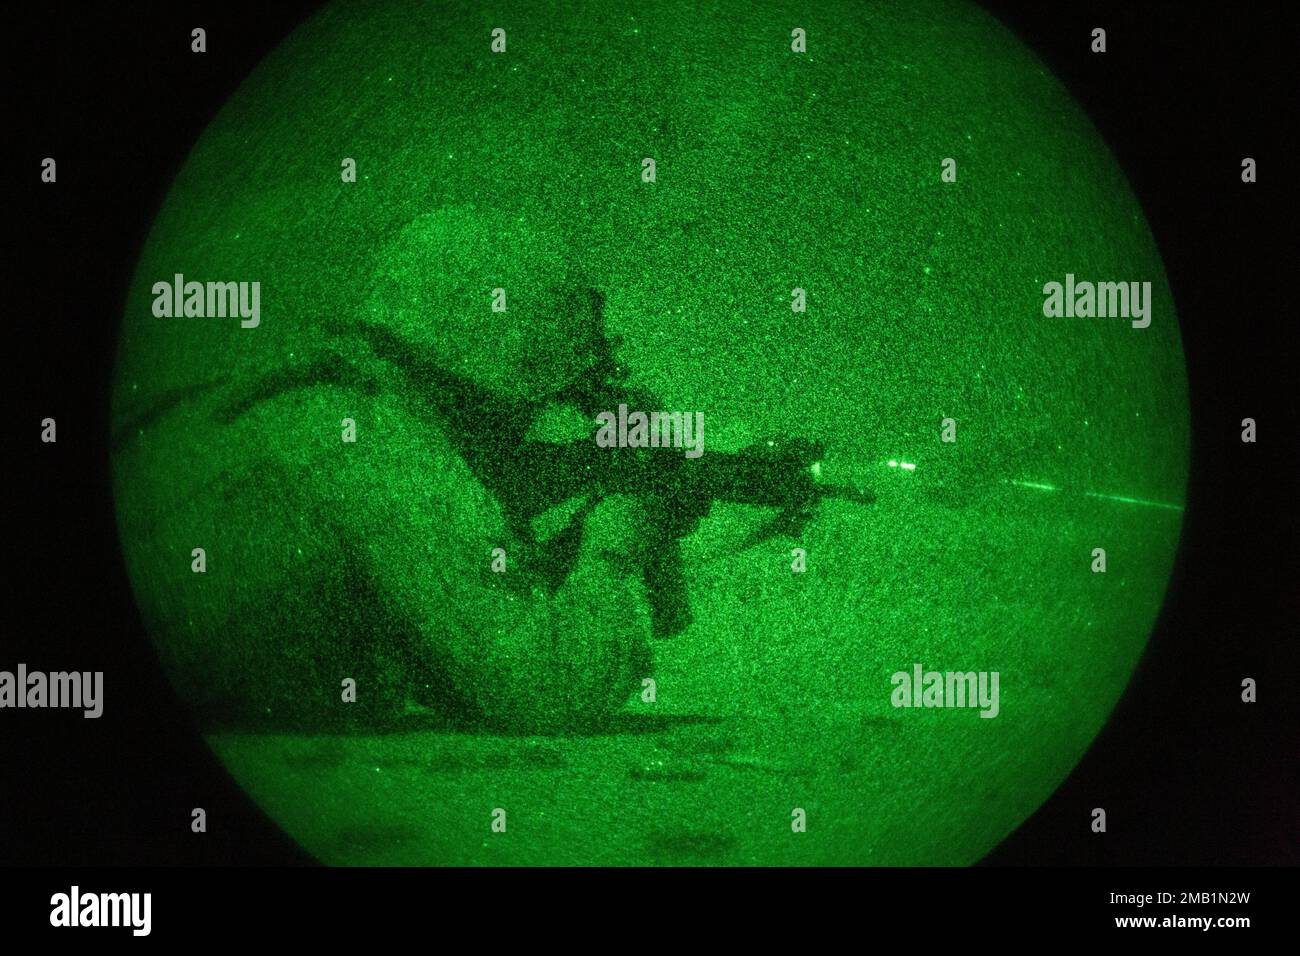 A U.S. Marine with the 13th Marine Expeditionary Unit, uses a PVS-14 Night Vision Monocular device to locate and fire at targets for rifle qualification tables 3-6 during Realistic Urban Training exercise at Marine Corp Air Ground Combat Center Twentynine Palms on June 9, 2022. The 13th MEU is currently conducting RUT exercise to enhance the integration and collective capability of the MEU’s command, air, ground, and logistics elements and prepare the 13th MEU to meet the nation’s crisis response needs during their upcoming overseas deployment. Stock Photo